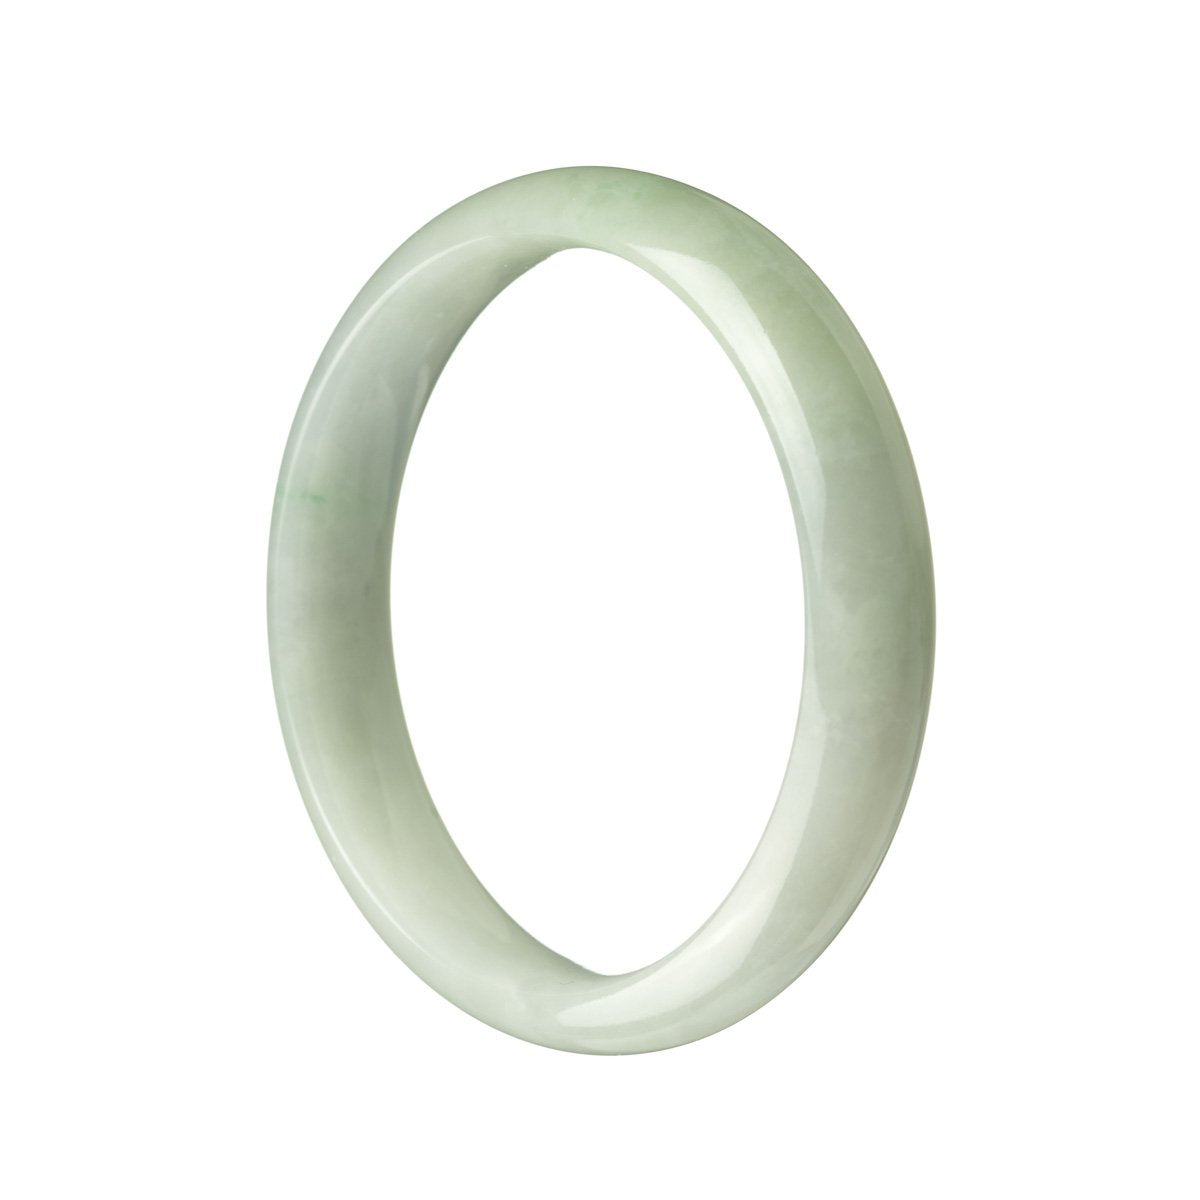 A close-up view of a jade bangle bracelet in a light green color. The bracelet is round with a smooth surface, and it is worn on a wrist. The jade stone has a traditional design, and its natural light green color adds a touch of elegance. This bracelet measures 56mm in diameter and has a semi-round shape. It is a certified product from MAYS GEMS, a reliable source for authentic jade jewelry.